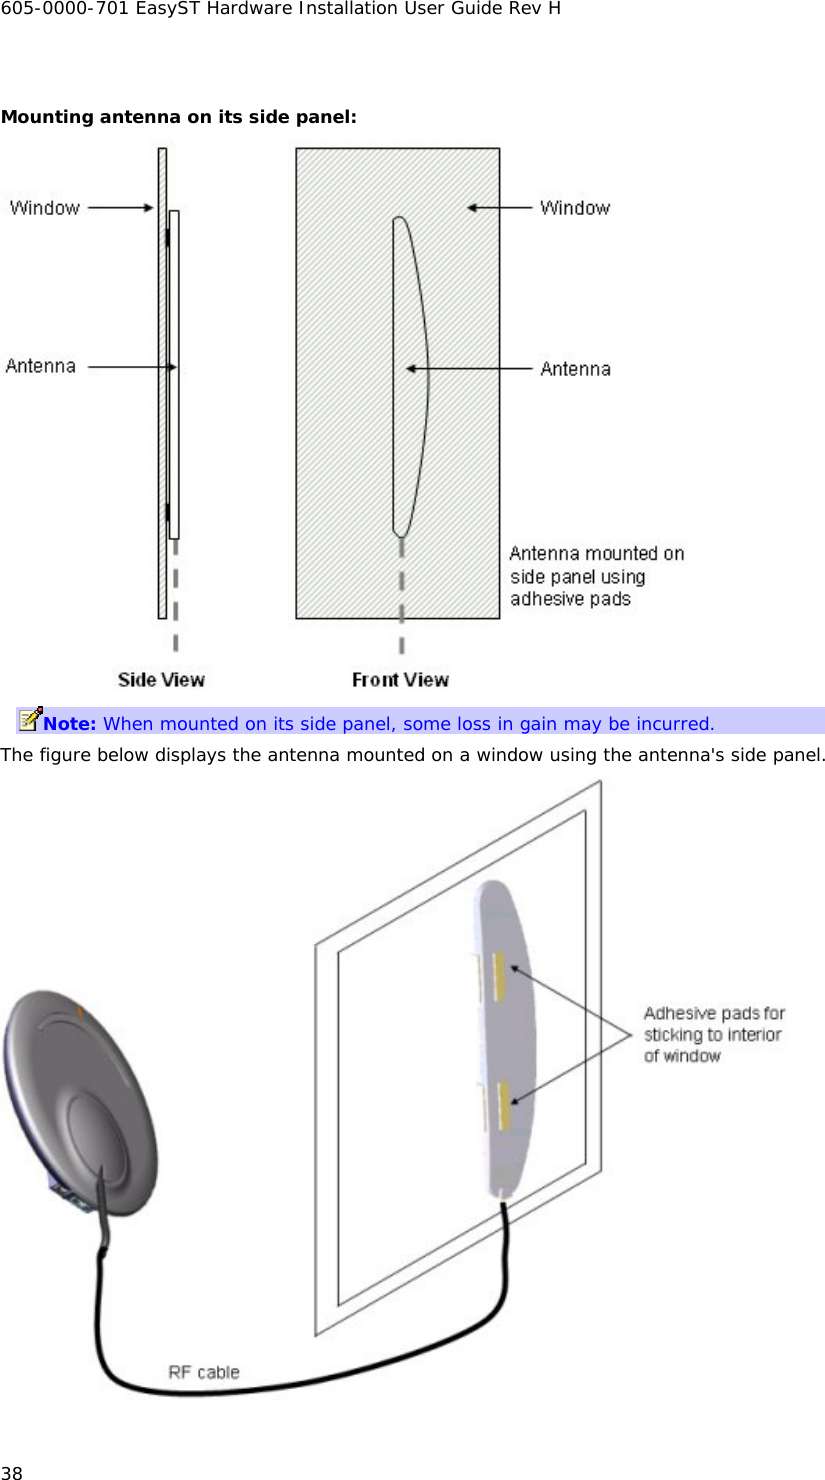 605-0000-701 EasyST Hardware Installation User Guide Rev H 38  Mounting antenna on its side panel:  Note: When mounted on its side panel, some loss in gain may be incurred. The figure below displays the antenna mounted on a window using the antenna&apos;s side panel.  